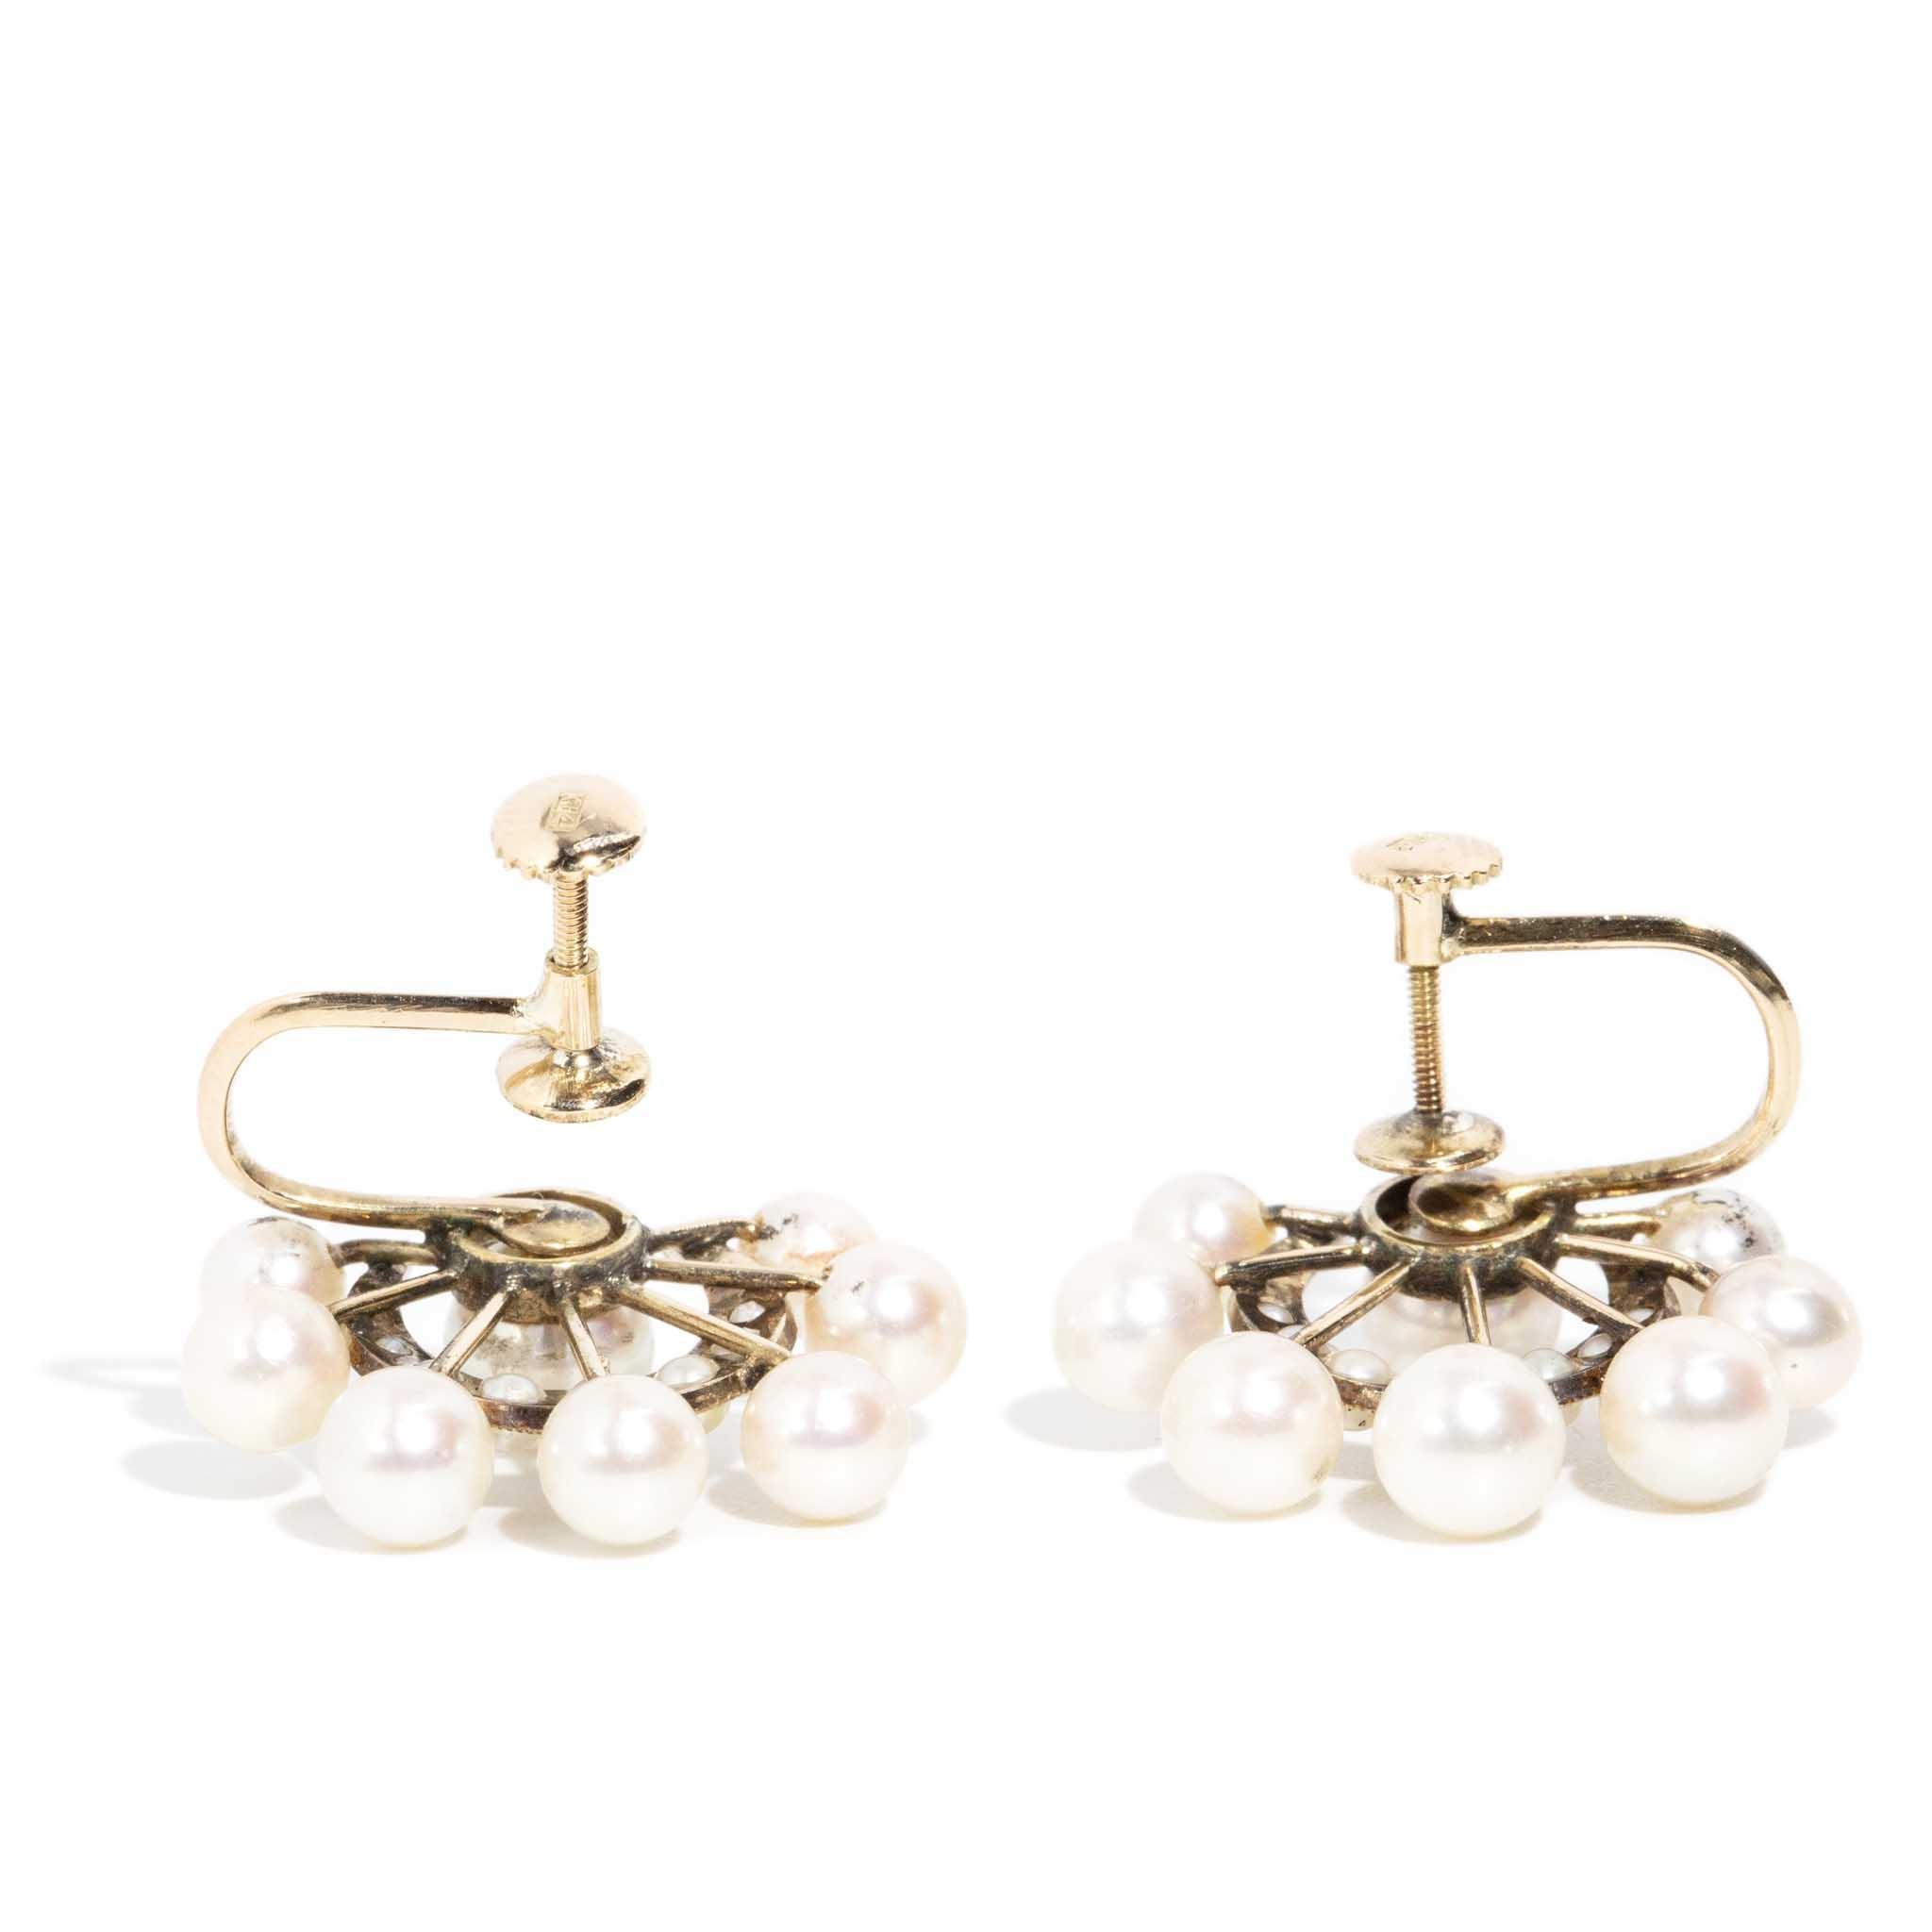 Antique Victorian Era Pearl & Seed Pearl Moon Cluster Earrings 14 Carat Gold In Good Condition For Sale In Hamilton, AU